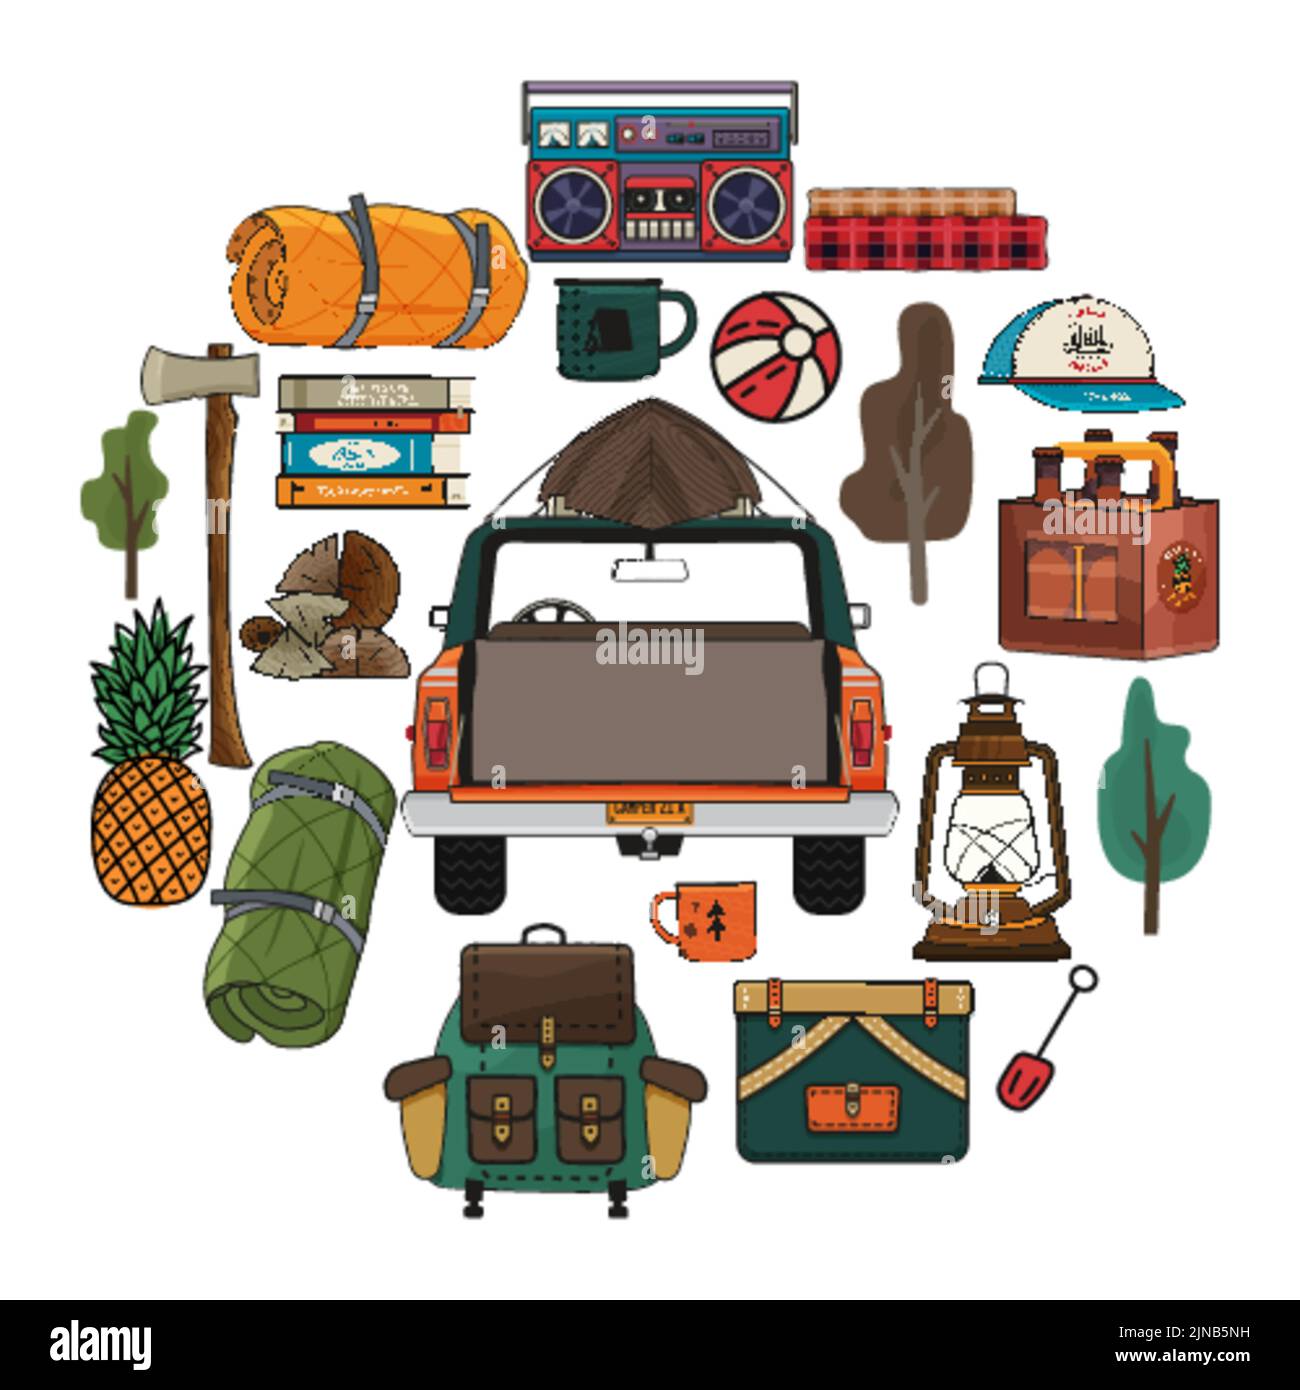 https://c8.alamy.com/comp/2JNB5NH/camping-adventure-clipart-set-in-round-style-summer-hiking-and-outdoors-collection-with-camp-car-backpack-axe-beer-and-other-elements-stock-2JNB5NH.jpg